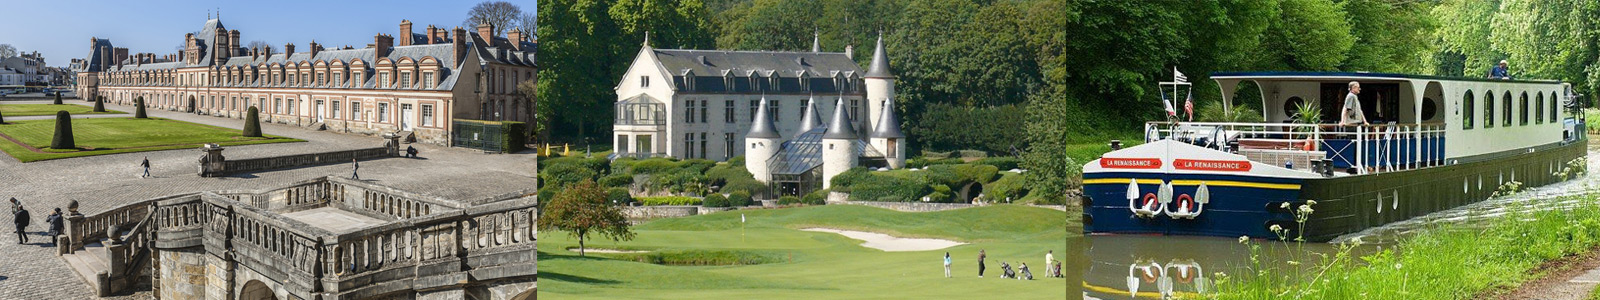 Burgundy France Golf Barge Cruise with PerryGolf Vacations